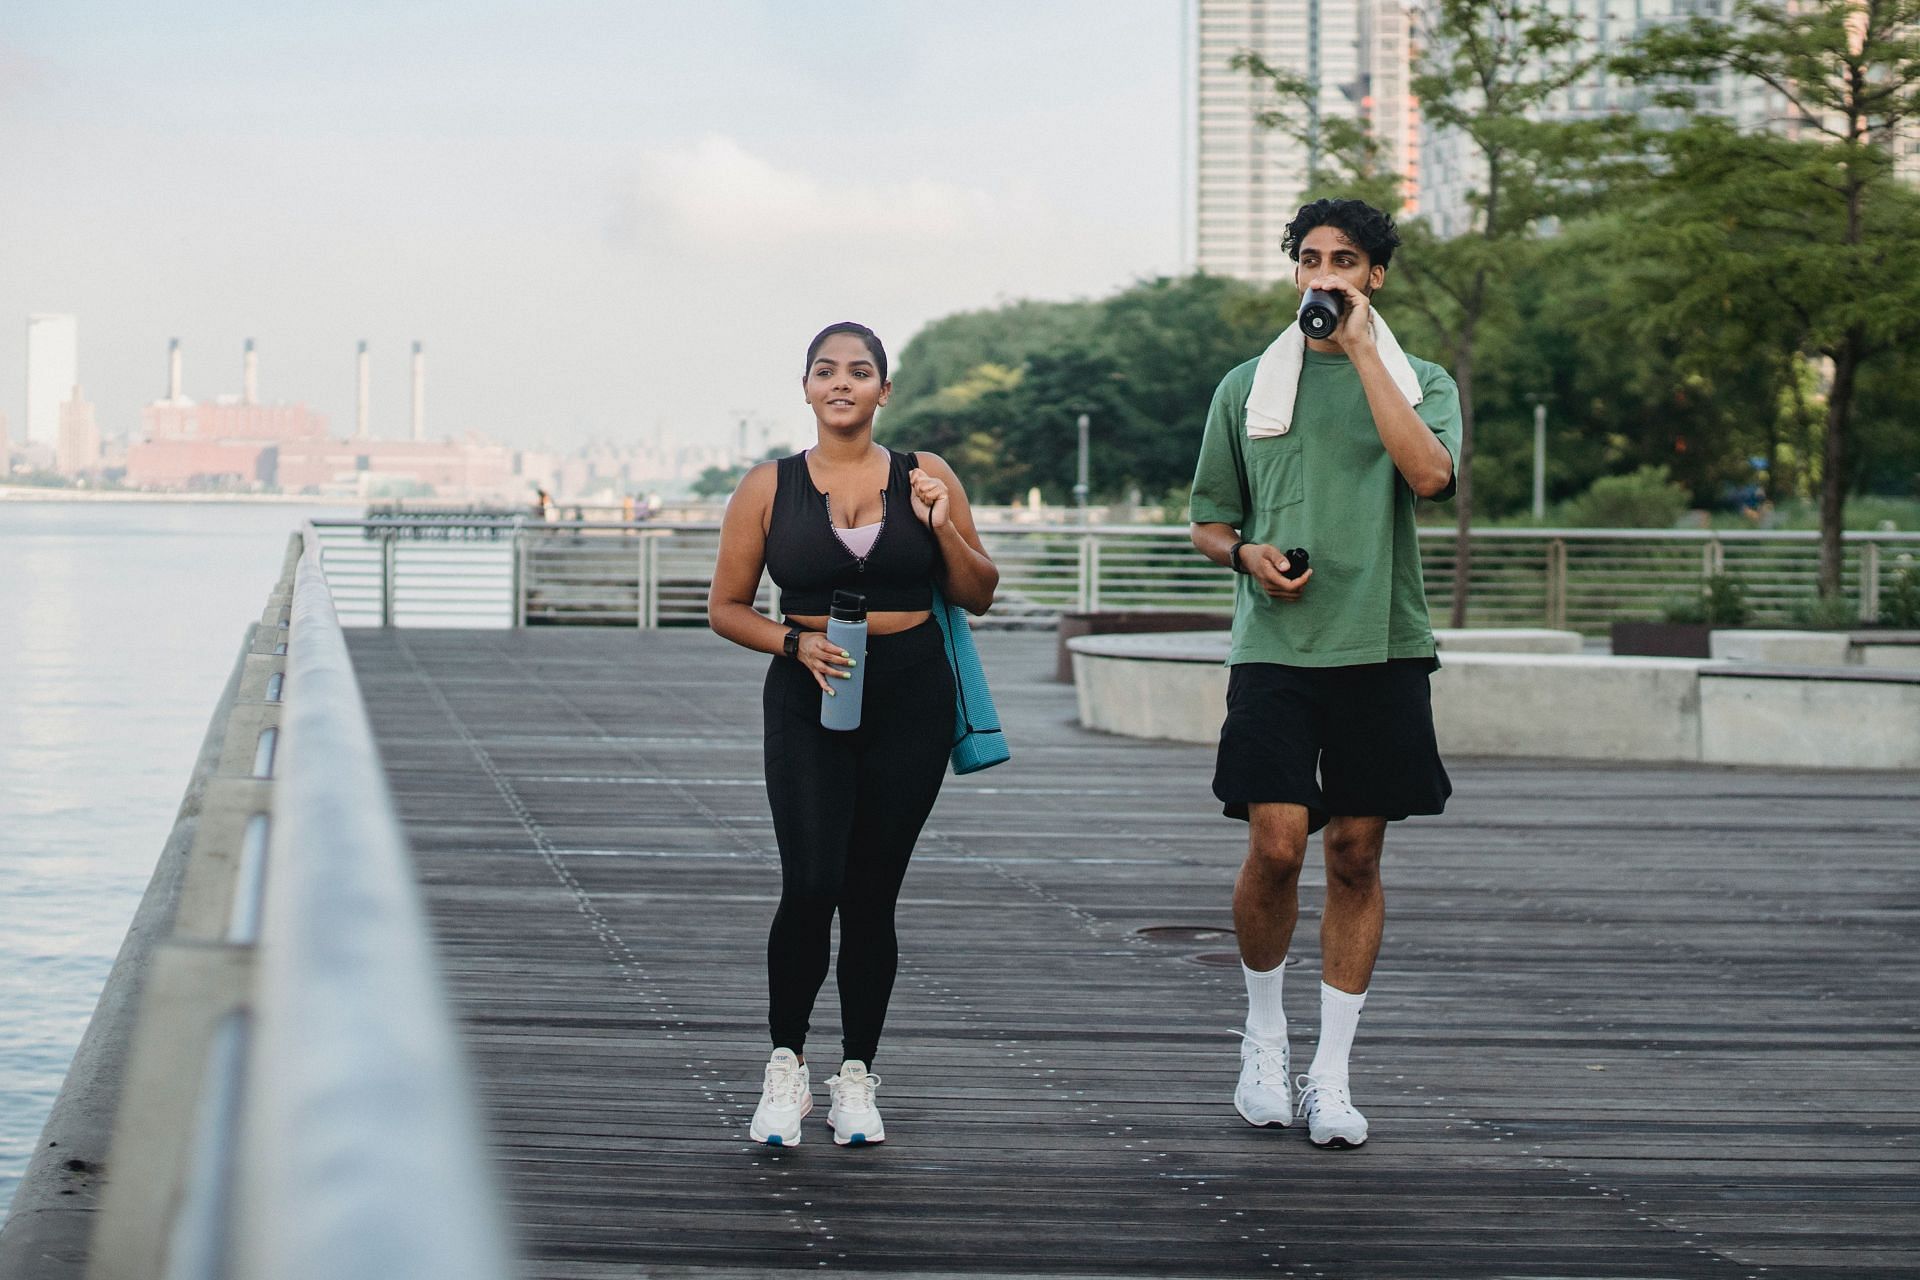 Brisk walking can be added in your routine. (Image via Pexels/ Ketut Subiyanto)